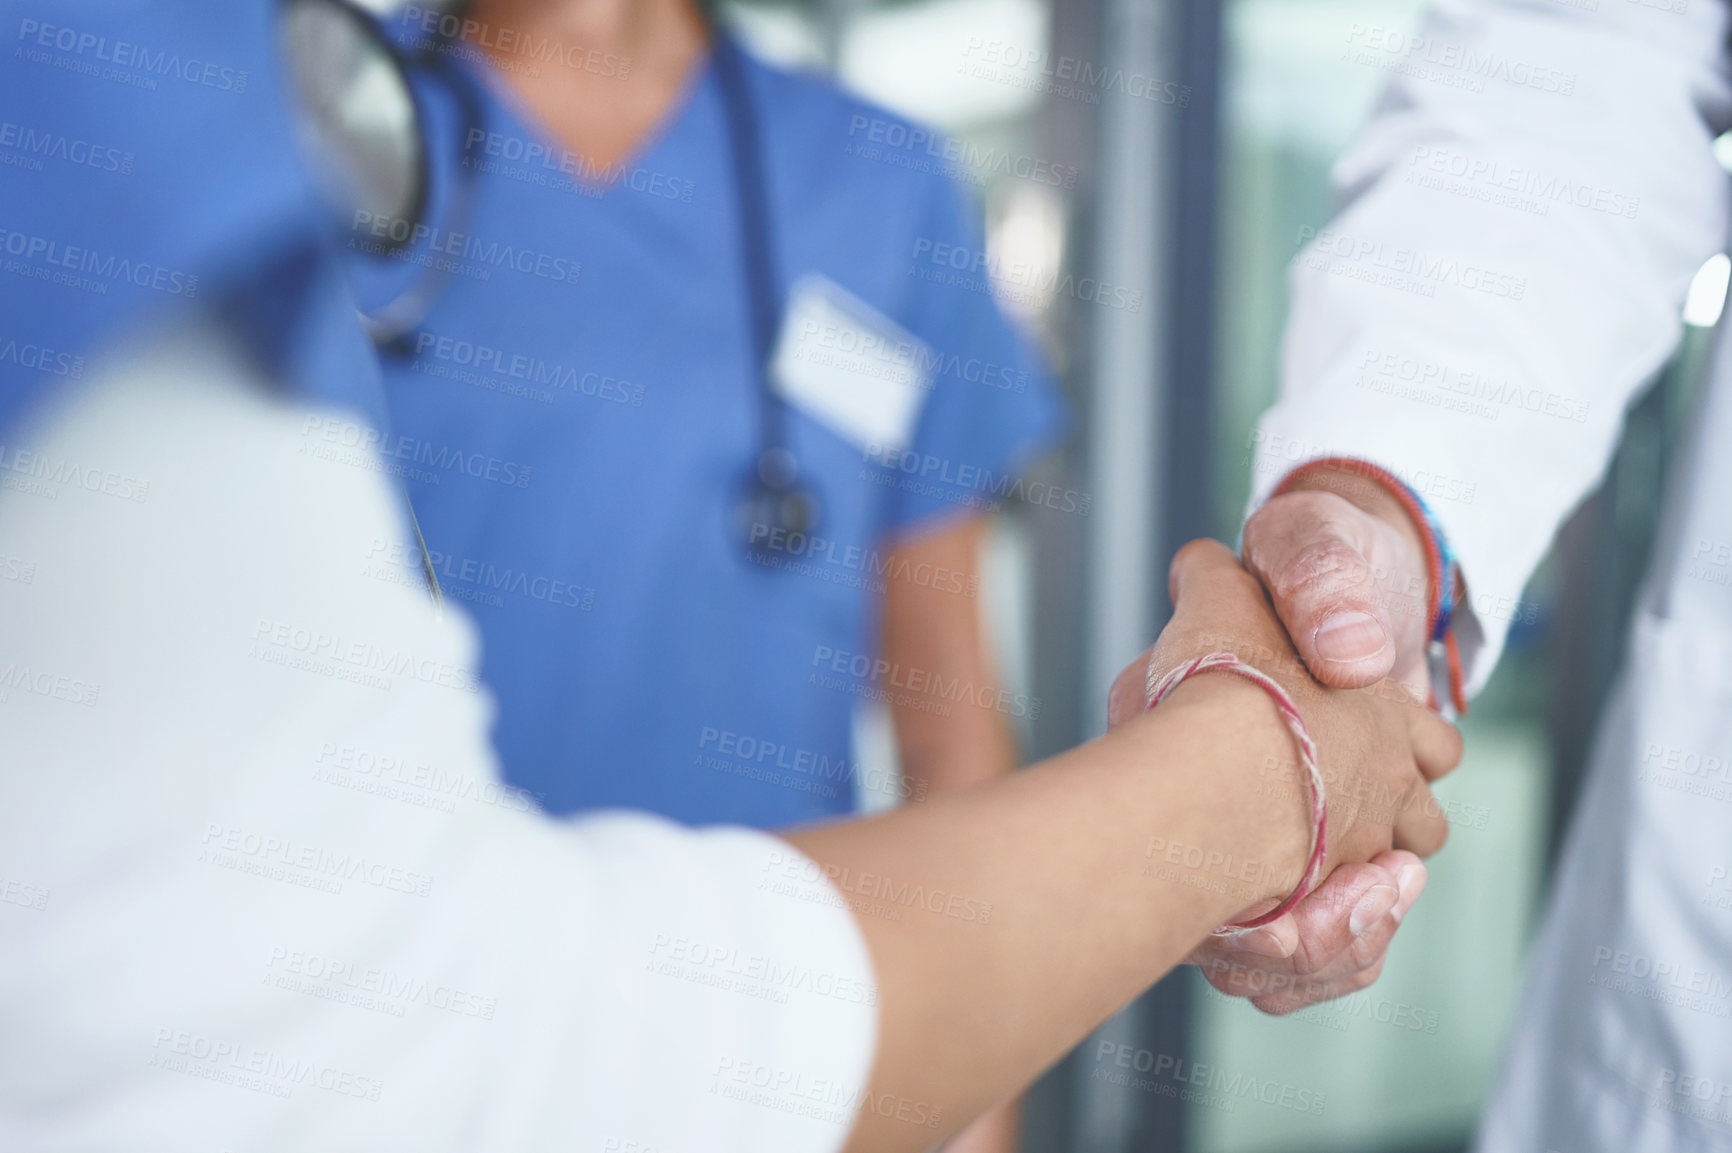 Buy stock photo Cropped shot of an unrecognizable nurse standing and shaking a doctor's hand in the clinic